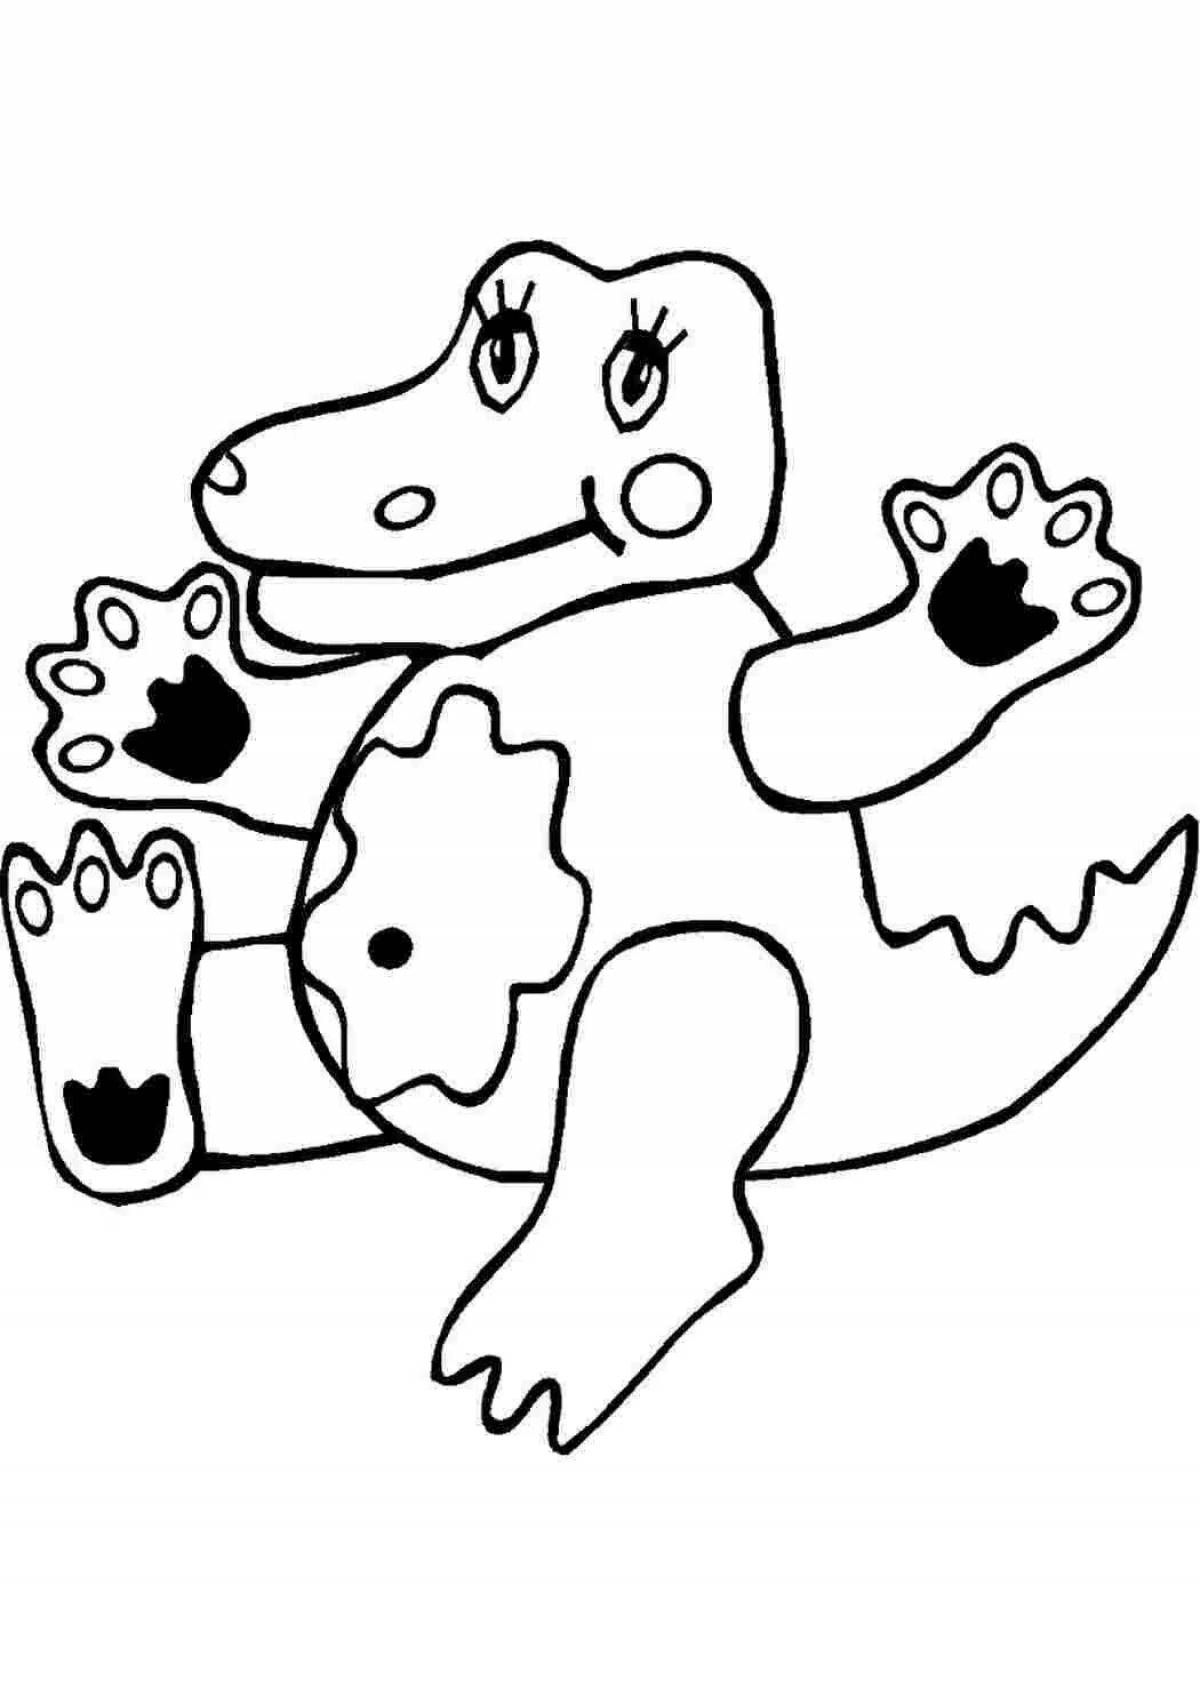 Bright coloring crocodile for children 3-4 years old